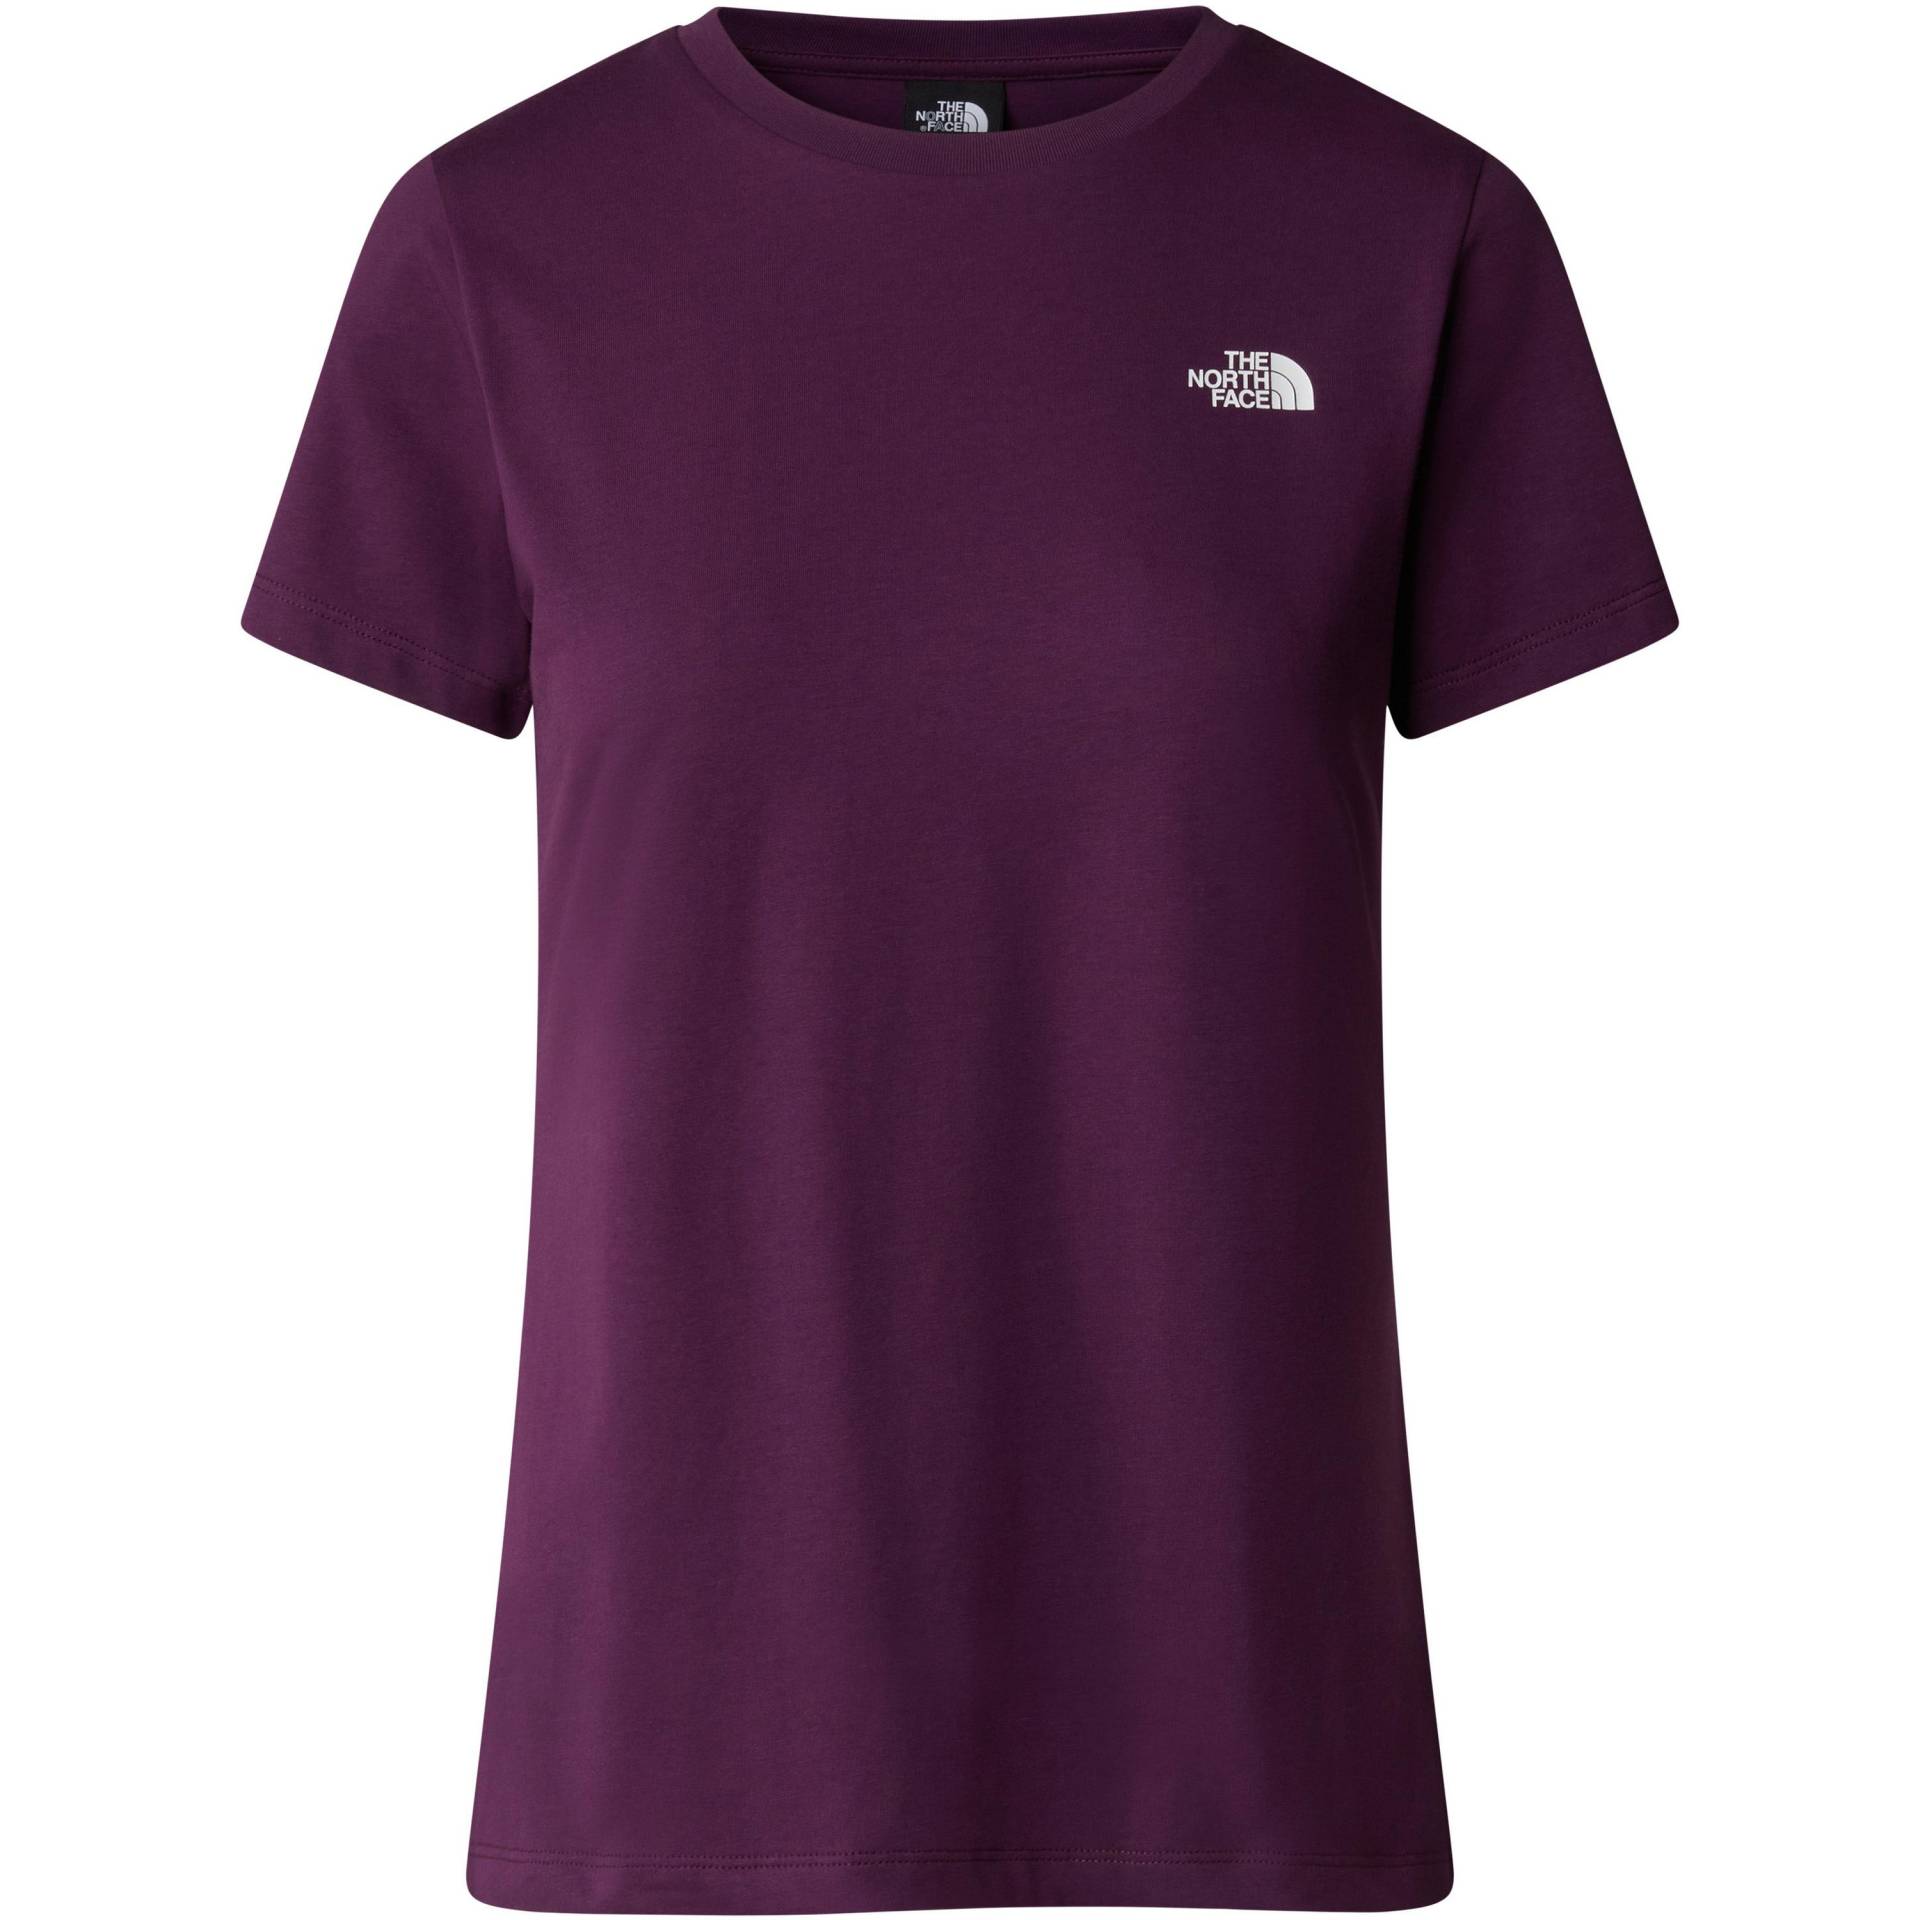 The North Face SIMPLE DOME T-Shirt Damen von The North Face